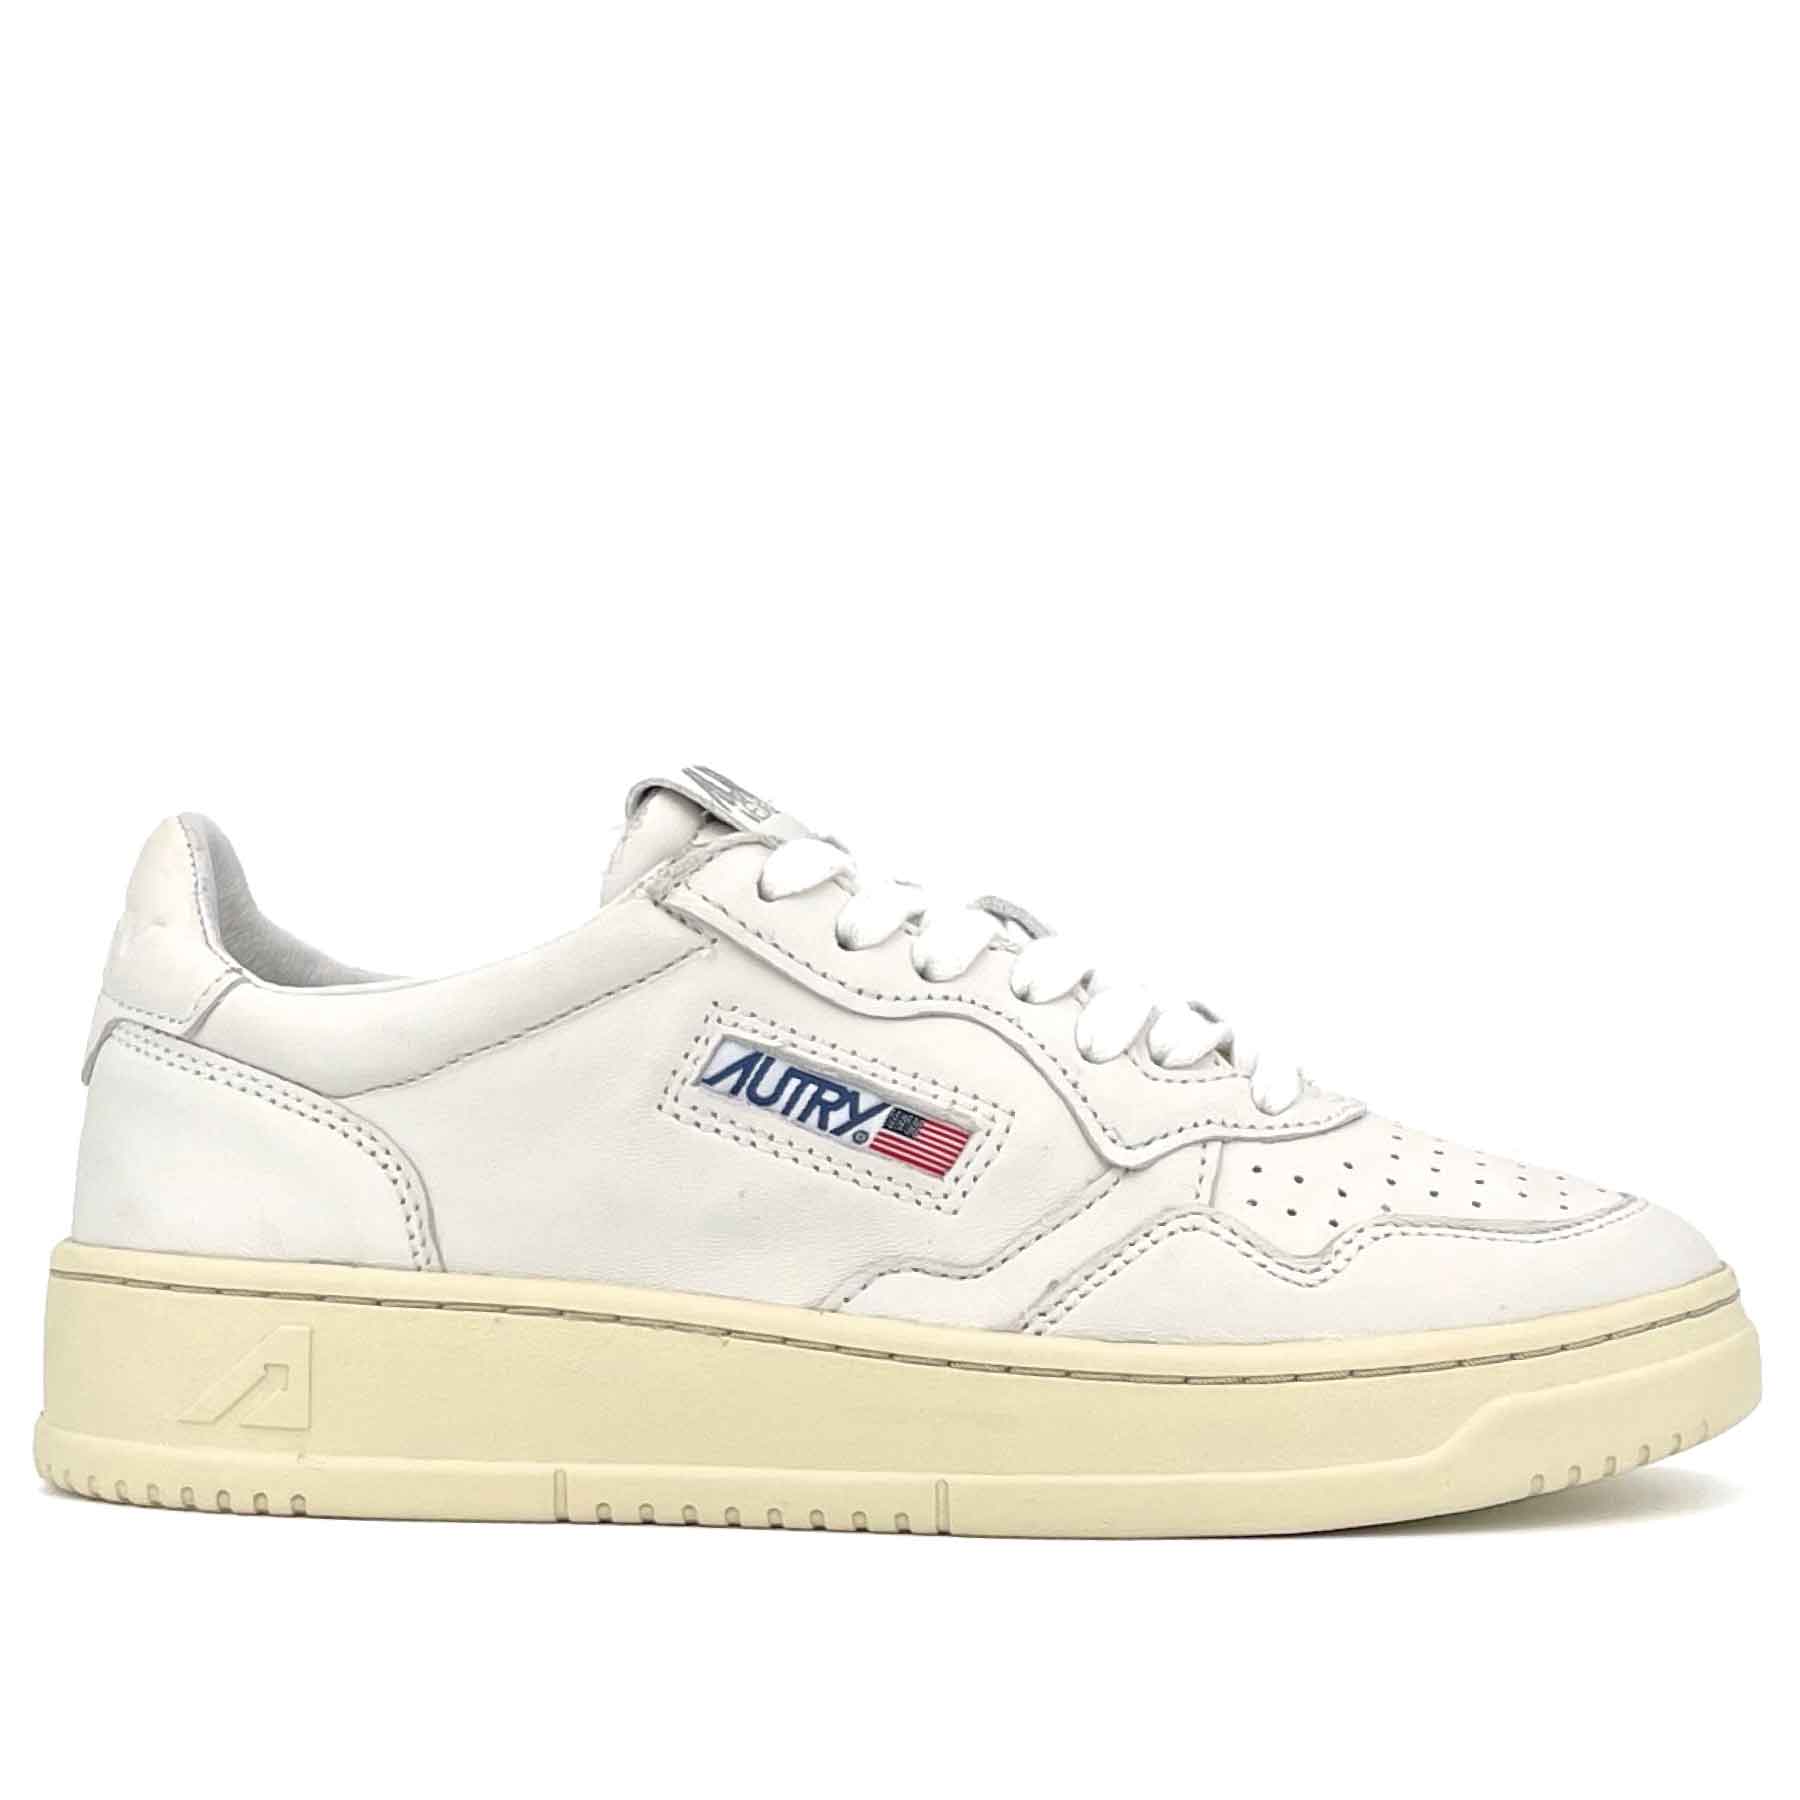 01 Medalist Low Women Goat Leather White White